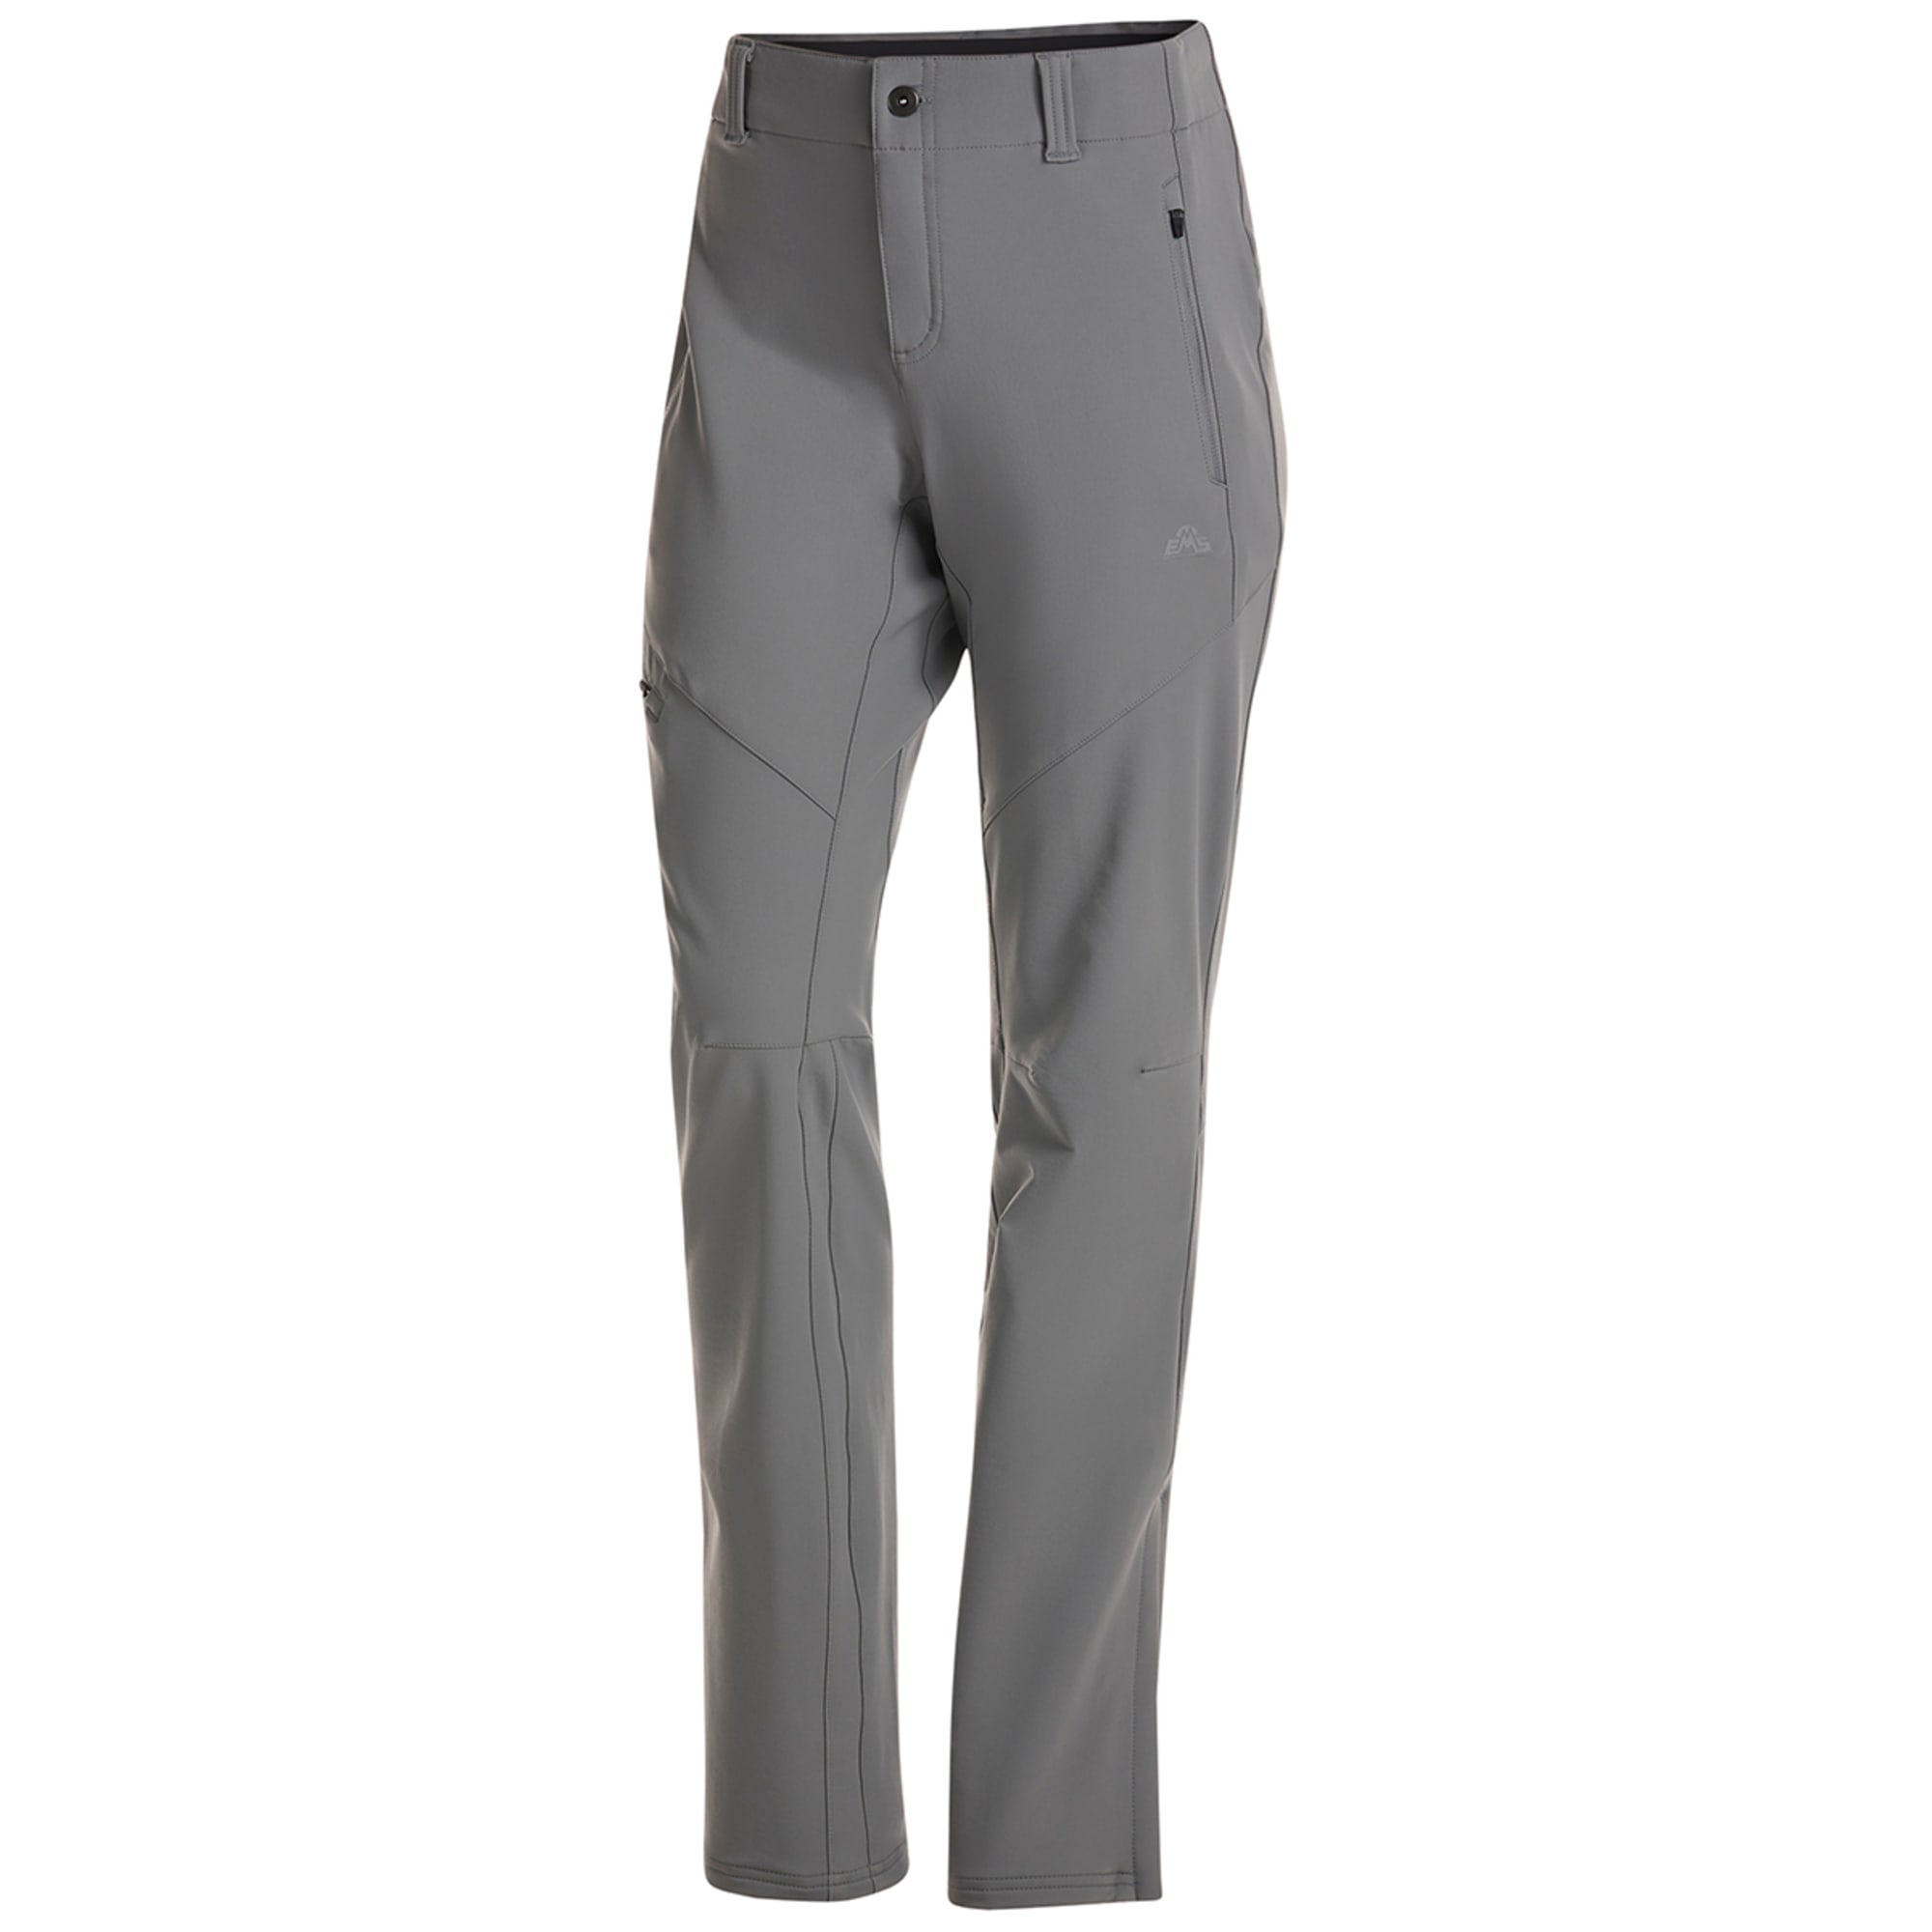 NWOT Womens Size 16 Eastern Mountain Sports EMS Gray Ascent Series Pinnacle  Pant